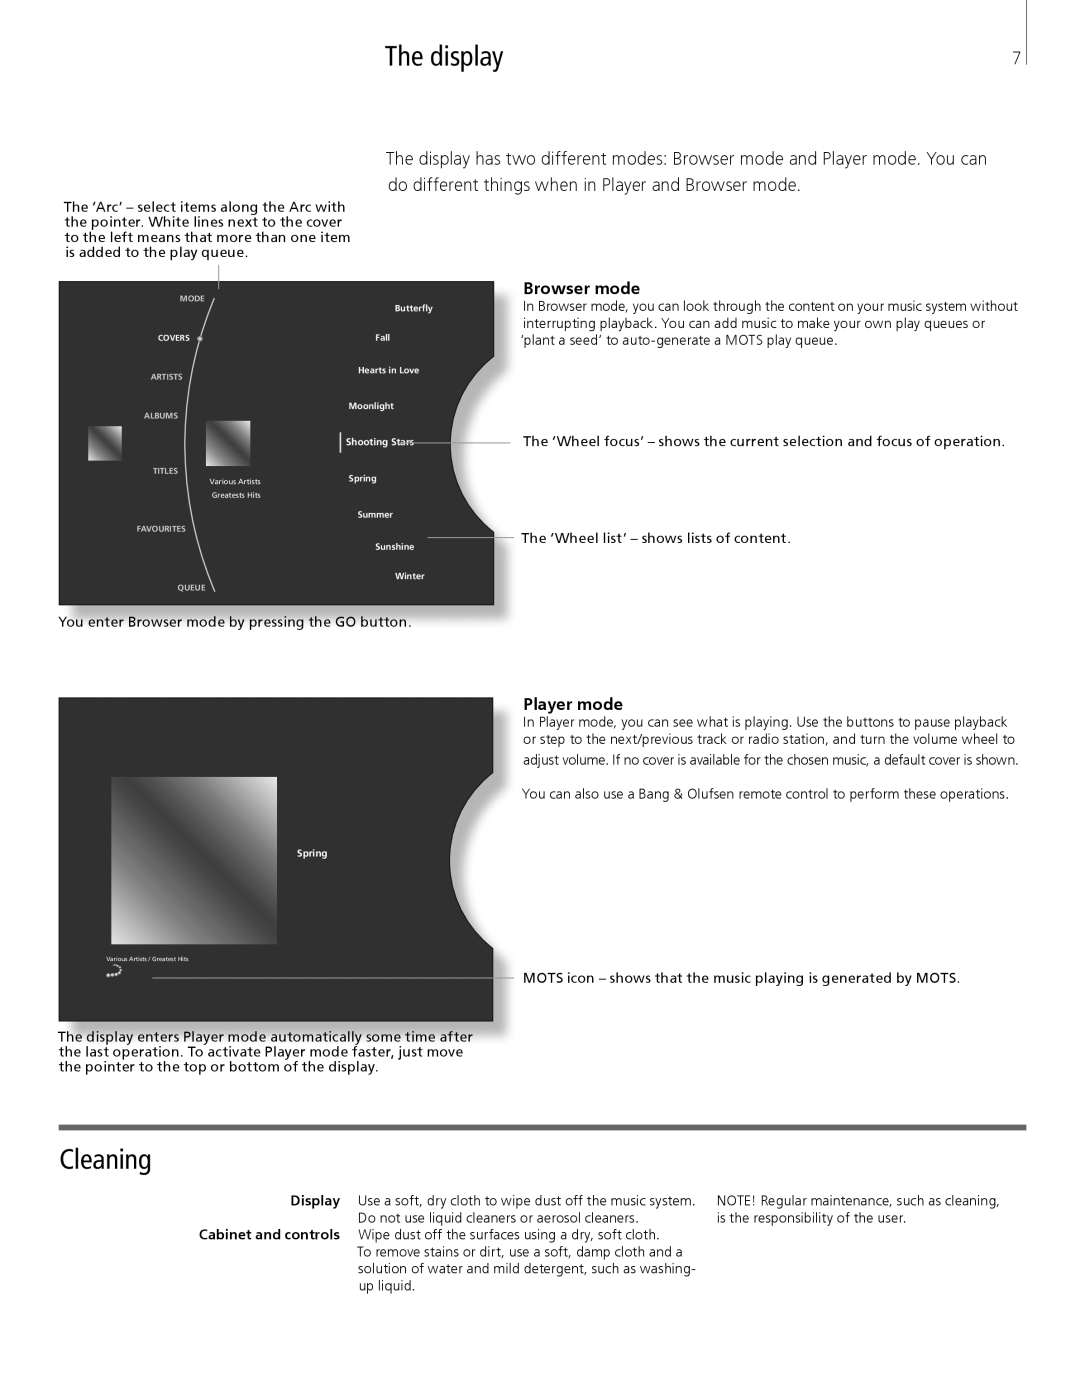 Bang & Olufsen 5 manual The display, Cleaning, Browser mode, Player mode 